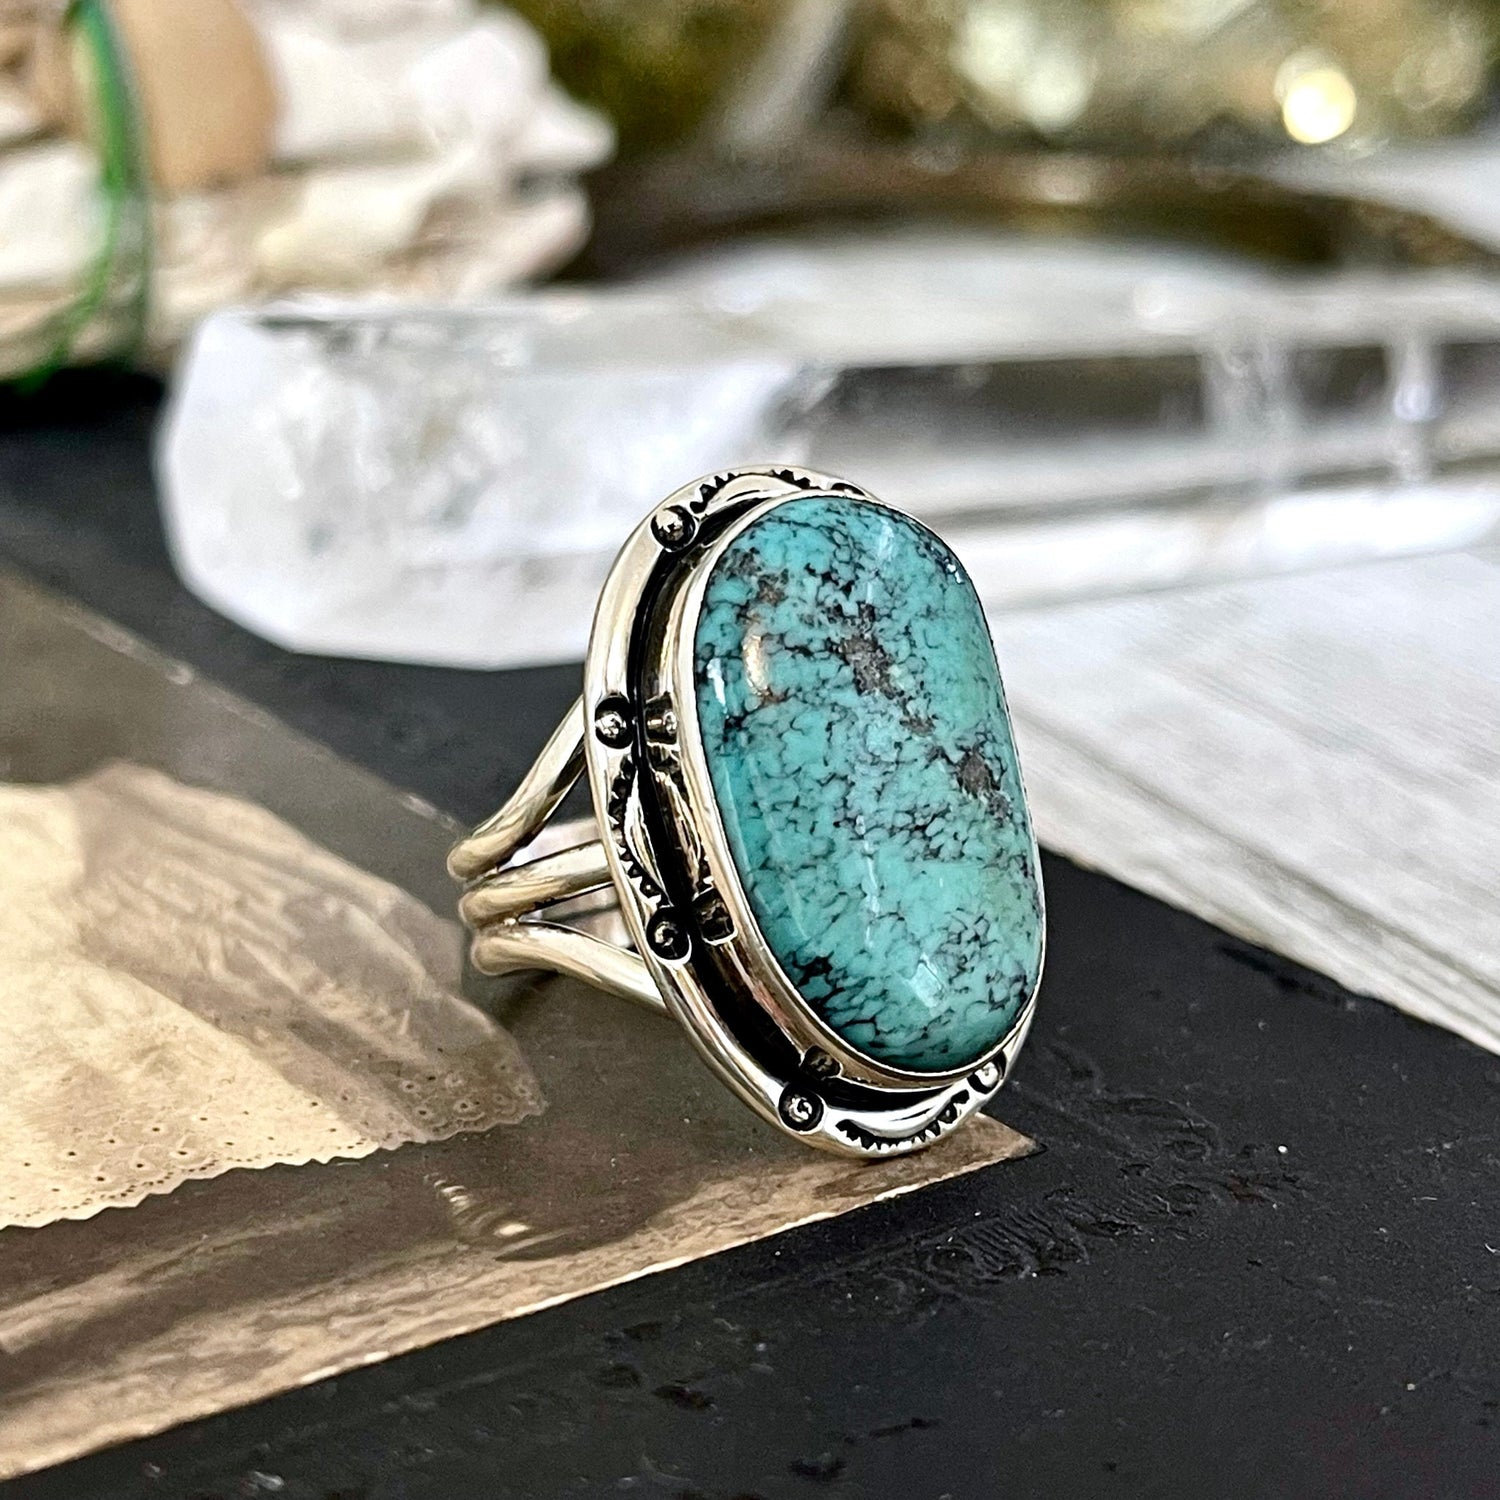 Size 9  Turquoise # 8 Statement Ring Set in Sterling Silver / Curated by FOXLARK Collection